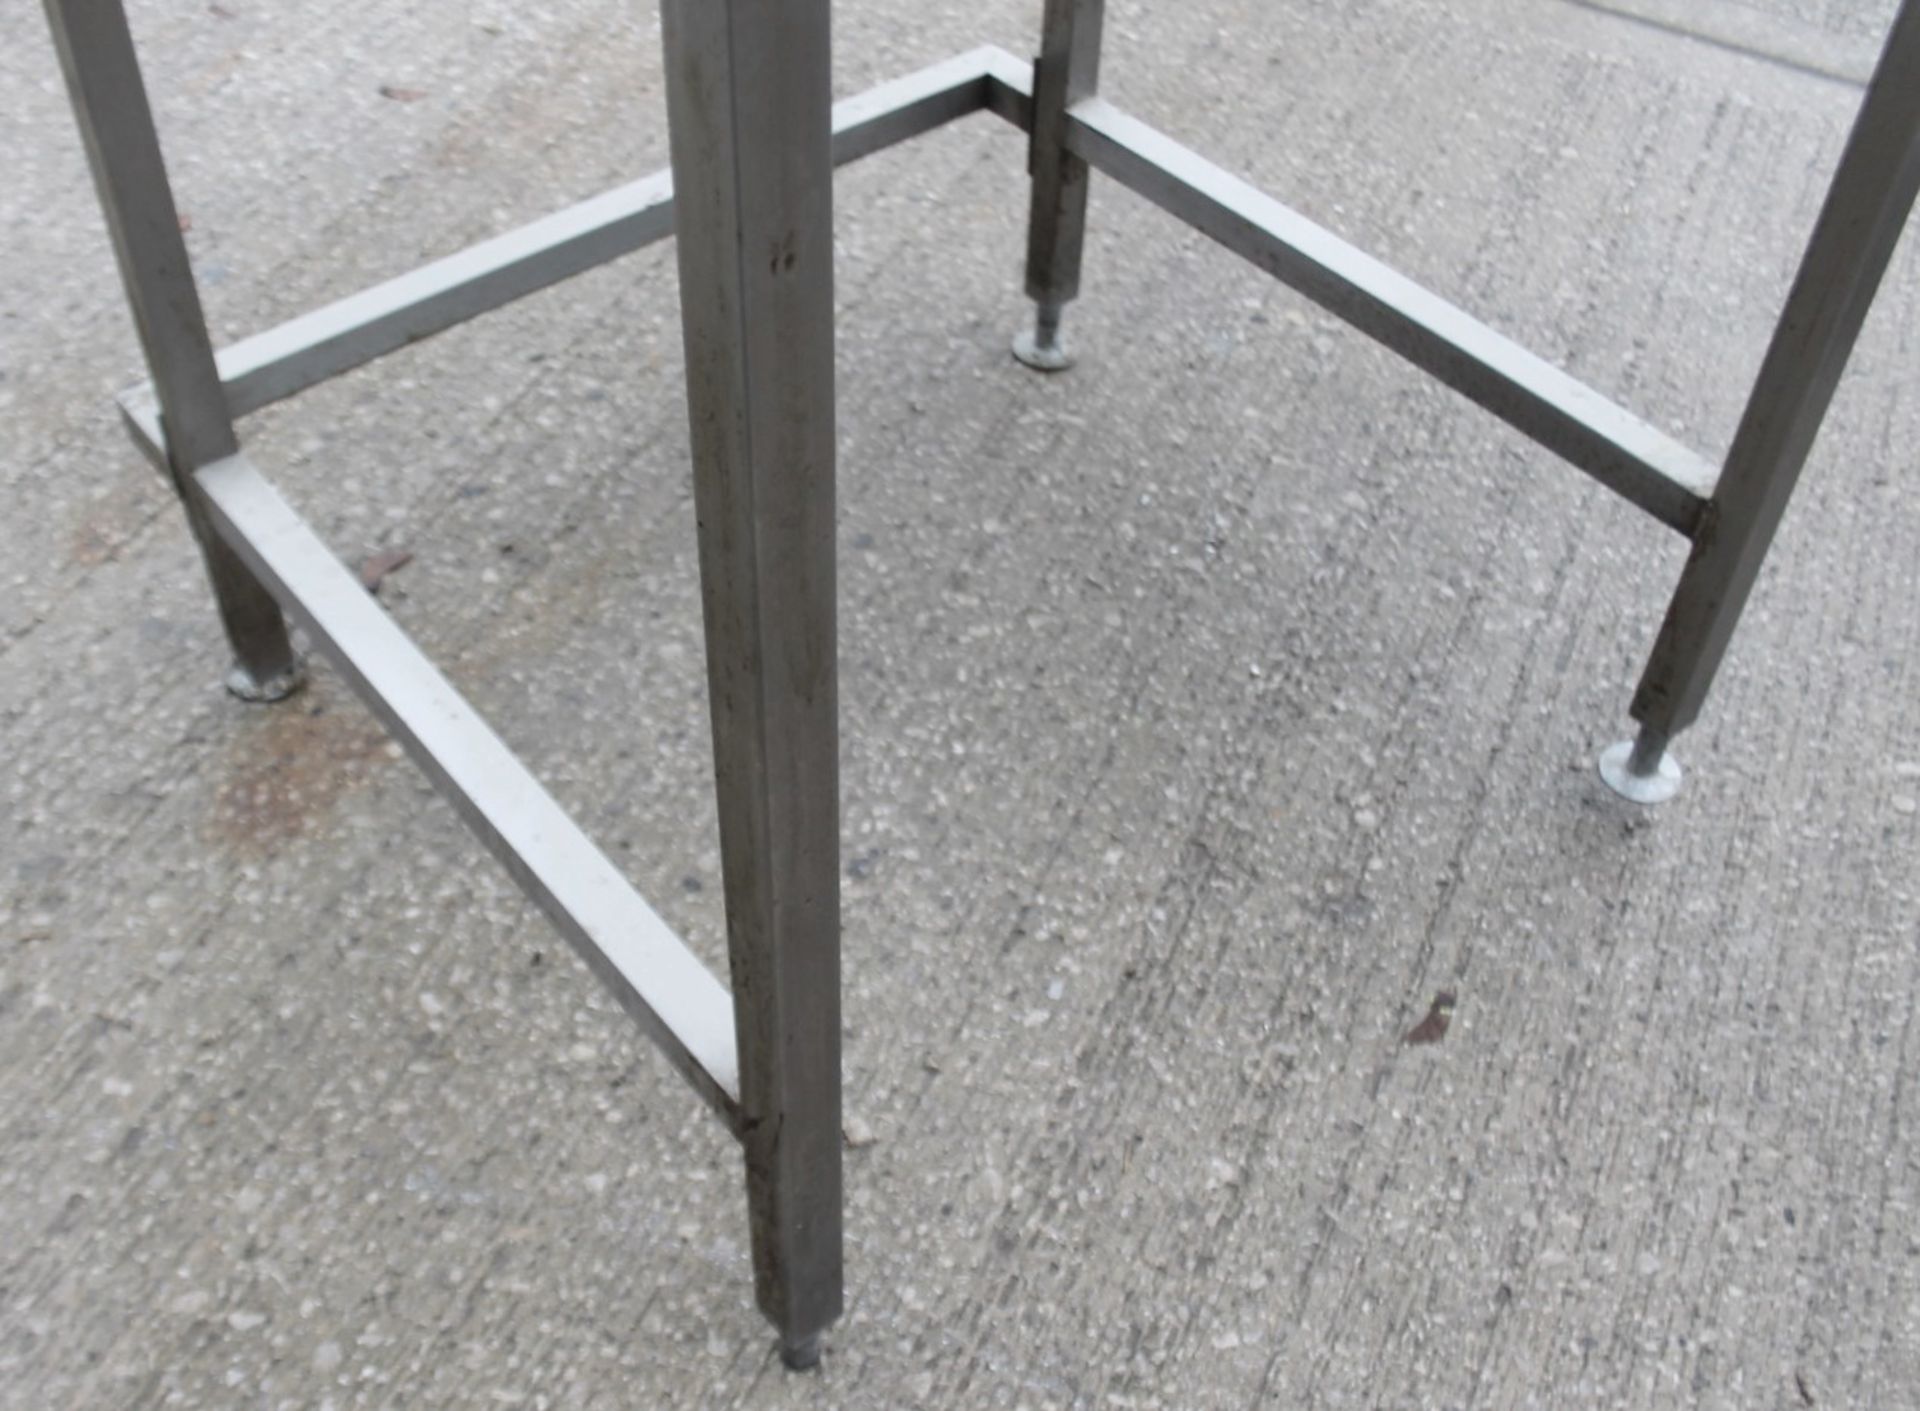 1 x Stainless Steel Commercial Square Prep Table With Upstand - Ref: GEN546 WH2 - CL802 UX - - Image 2 of 3